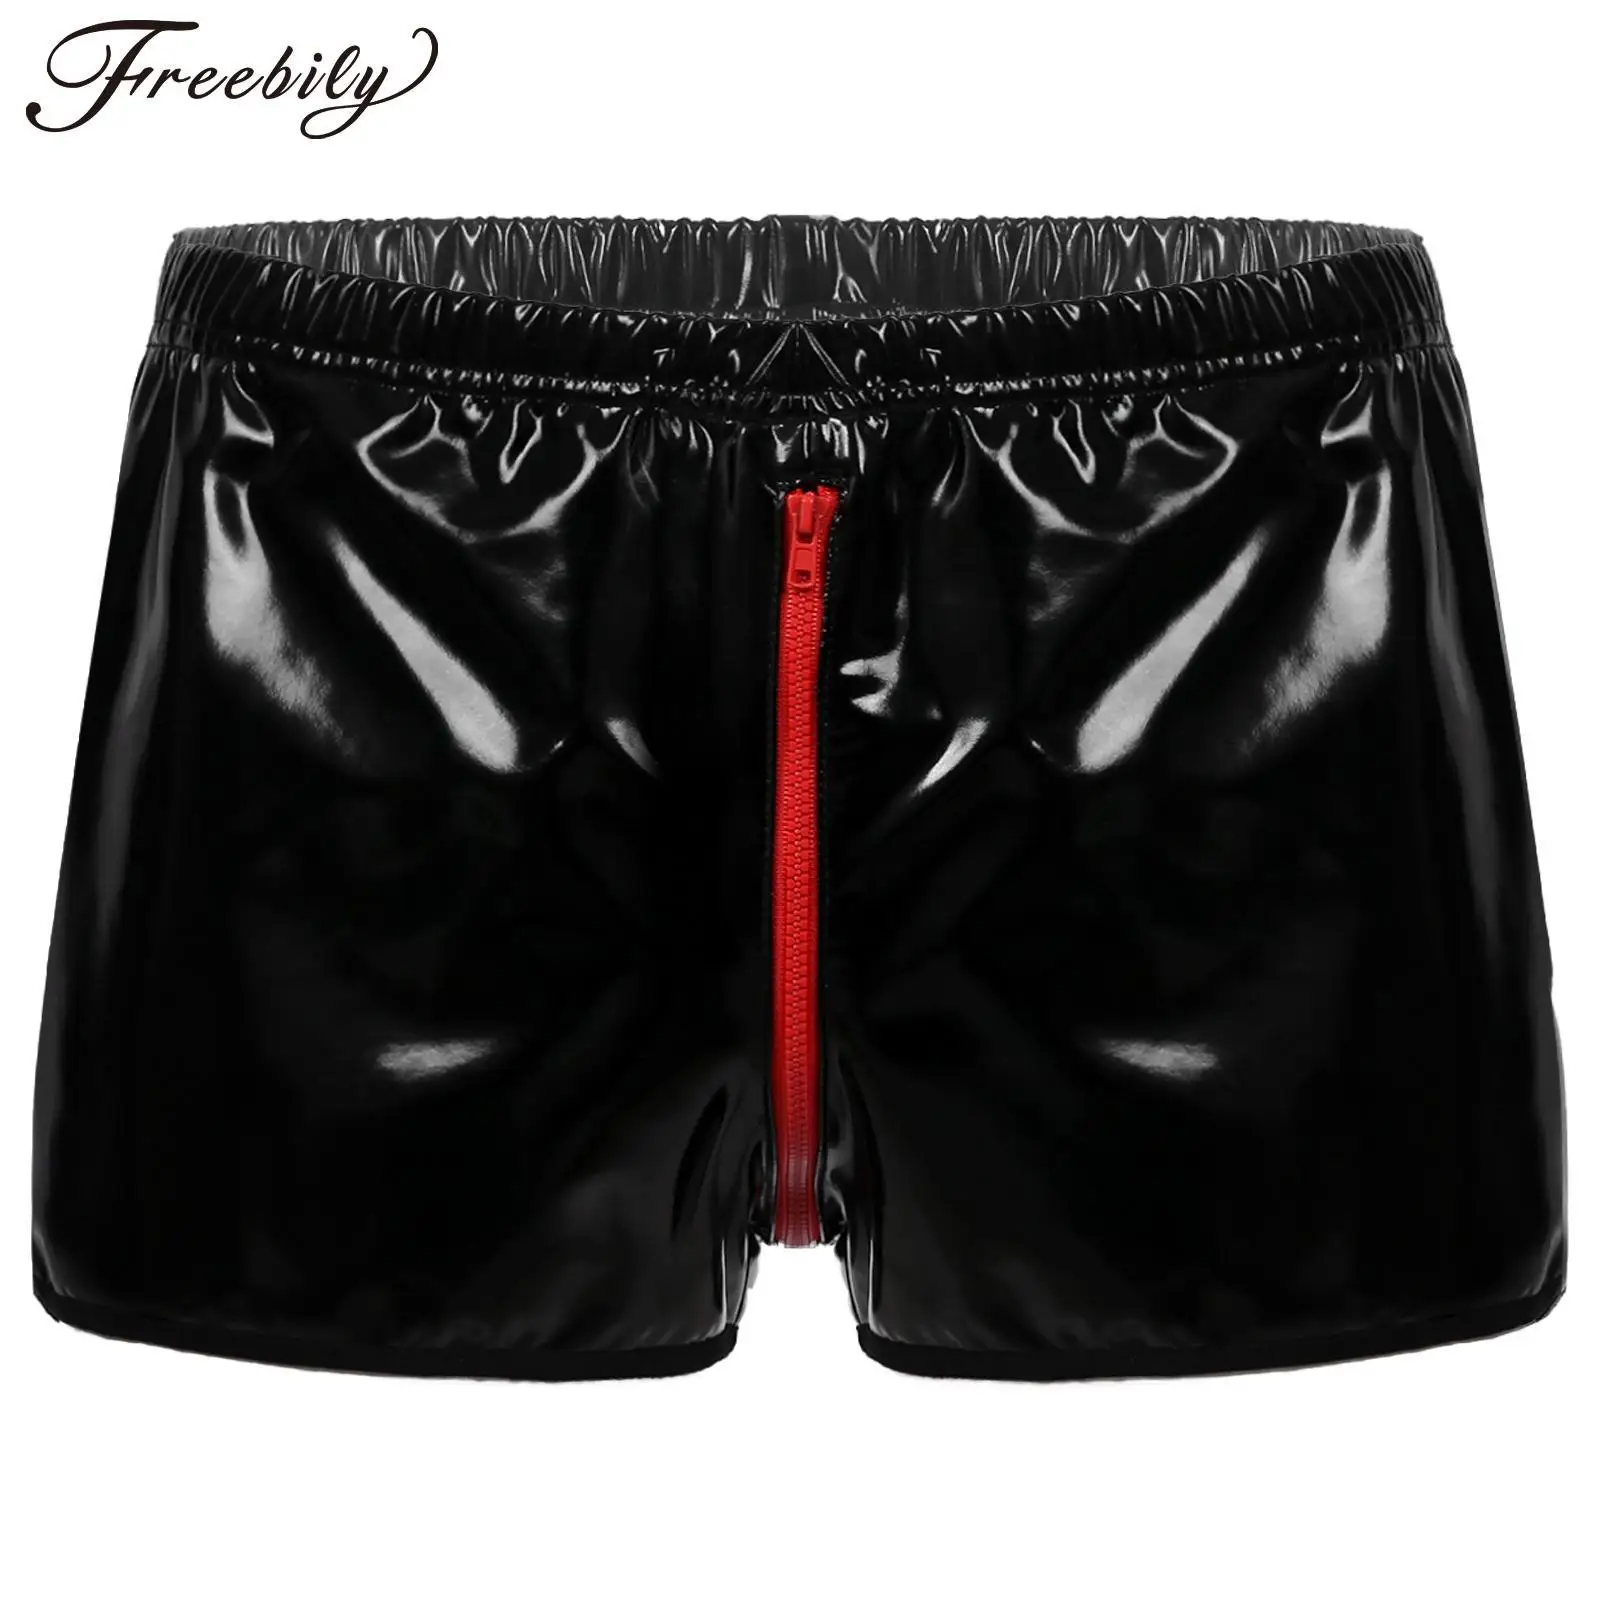 

Men Wet Look Patent Leather Shorts Elastic Waistband Zipper Crotch Hot Pants Rave Party Nightclub Pole Dancing Clothing Clubwear